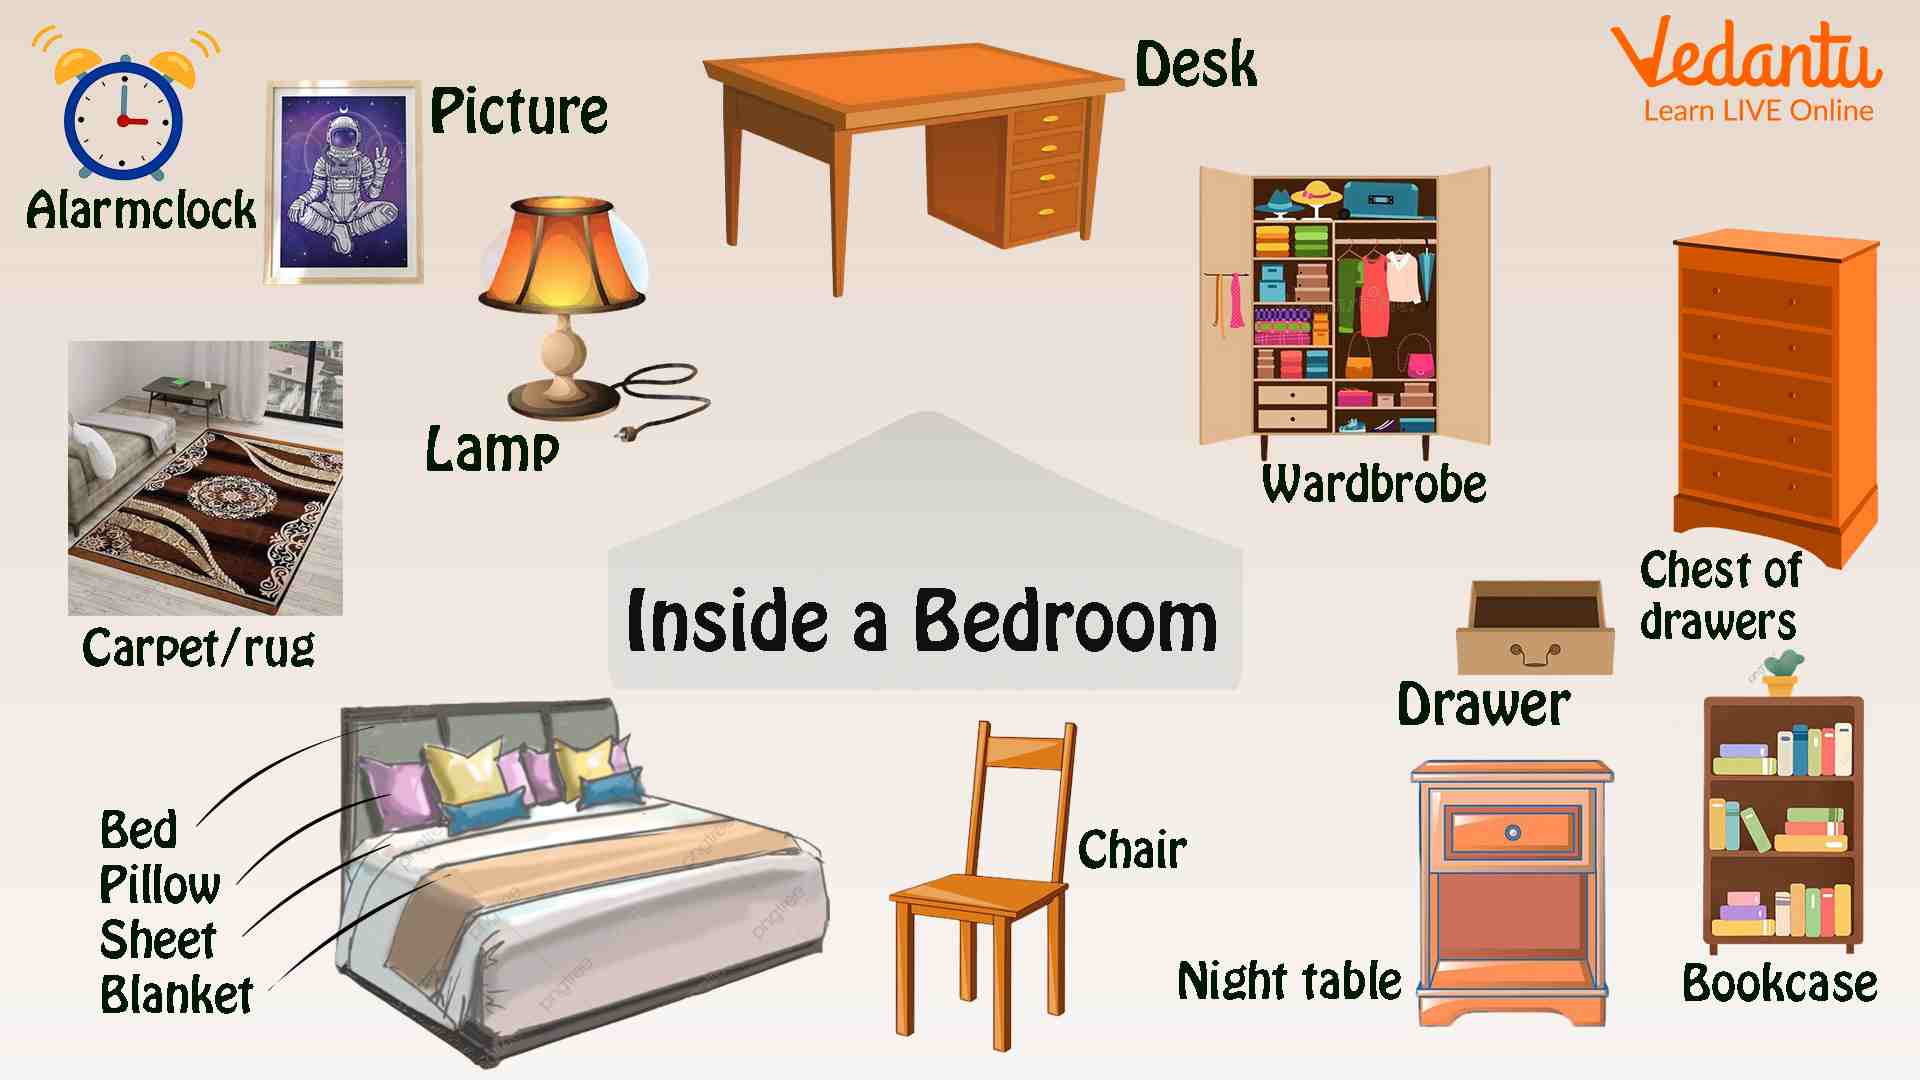 Image illustrating things commonly found in the bedroom